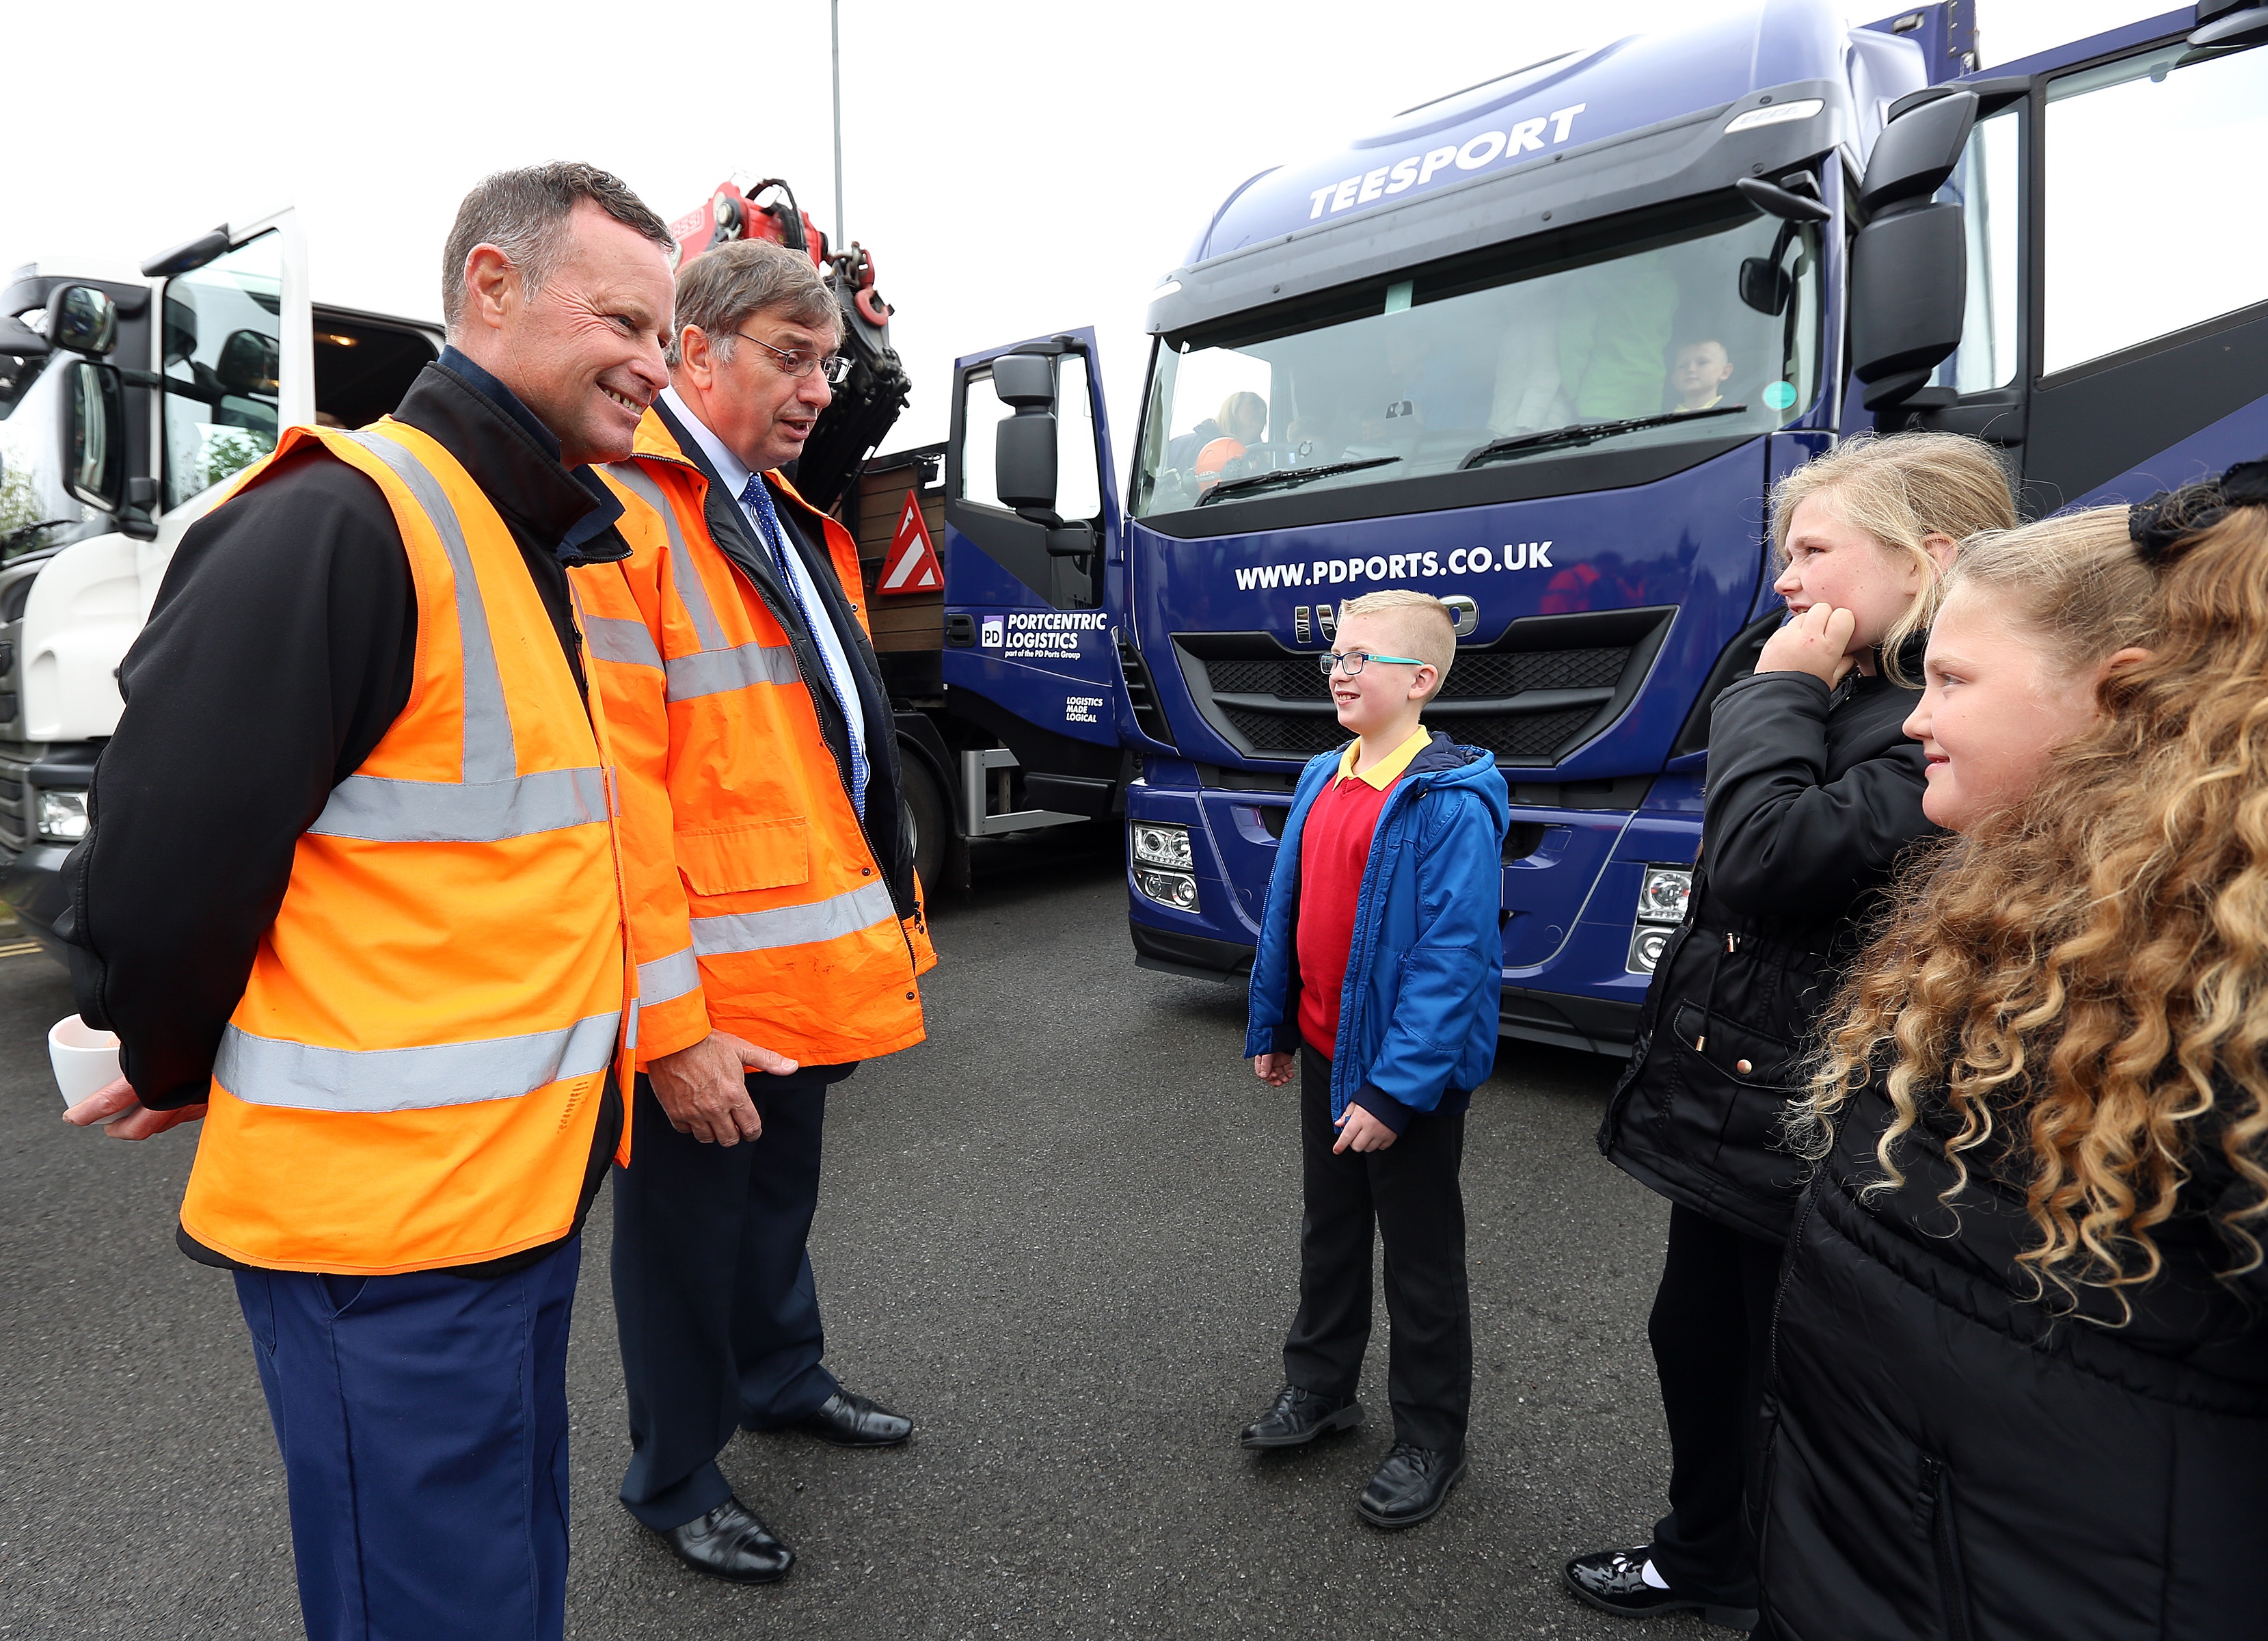 Taken: 19th September 2016  PD Ports Story ; National lorry week story, pictured at Inspire 2 Learn @ Eston Civic & Learning Centre, Normanby Road. Pupils from Southbank Primary (y6) - red top/yellow collar and Grangetown Primary (y4) - red top/white collar. 
Photographer/Byline Dave Charnley Photography  www.davecharnleyphotography.com